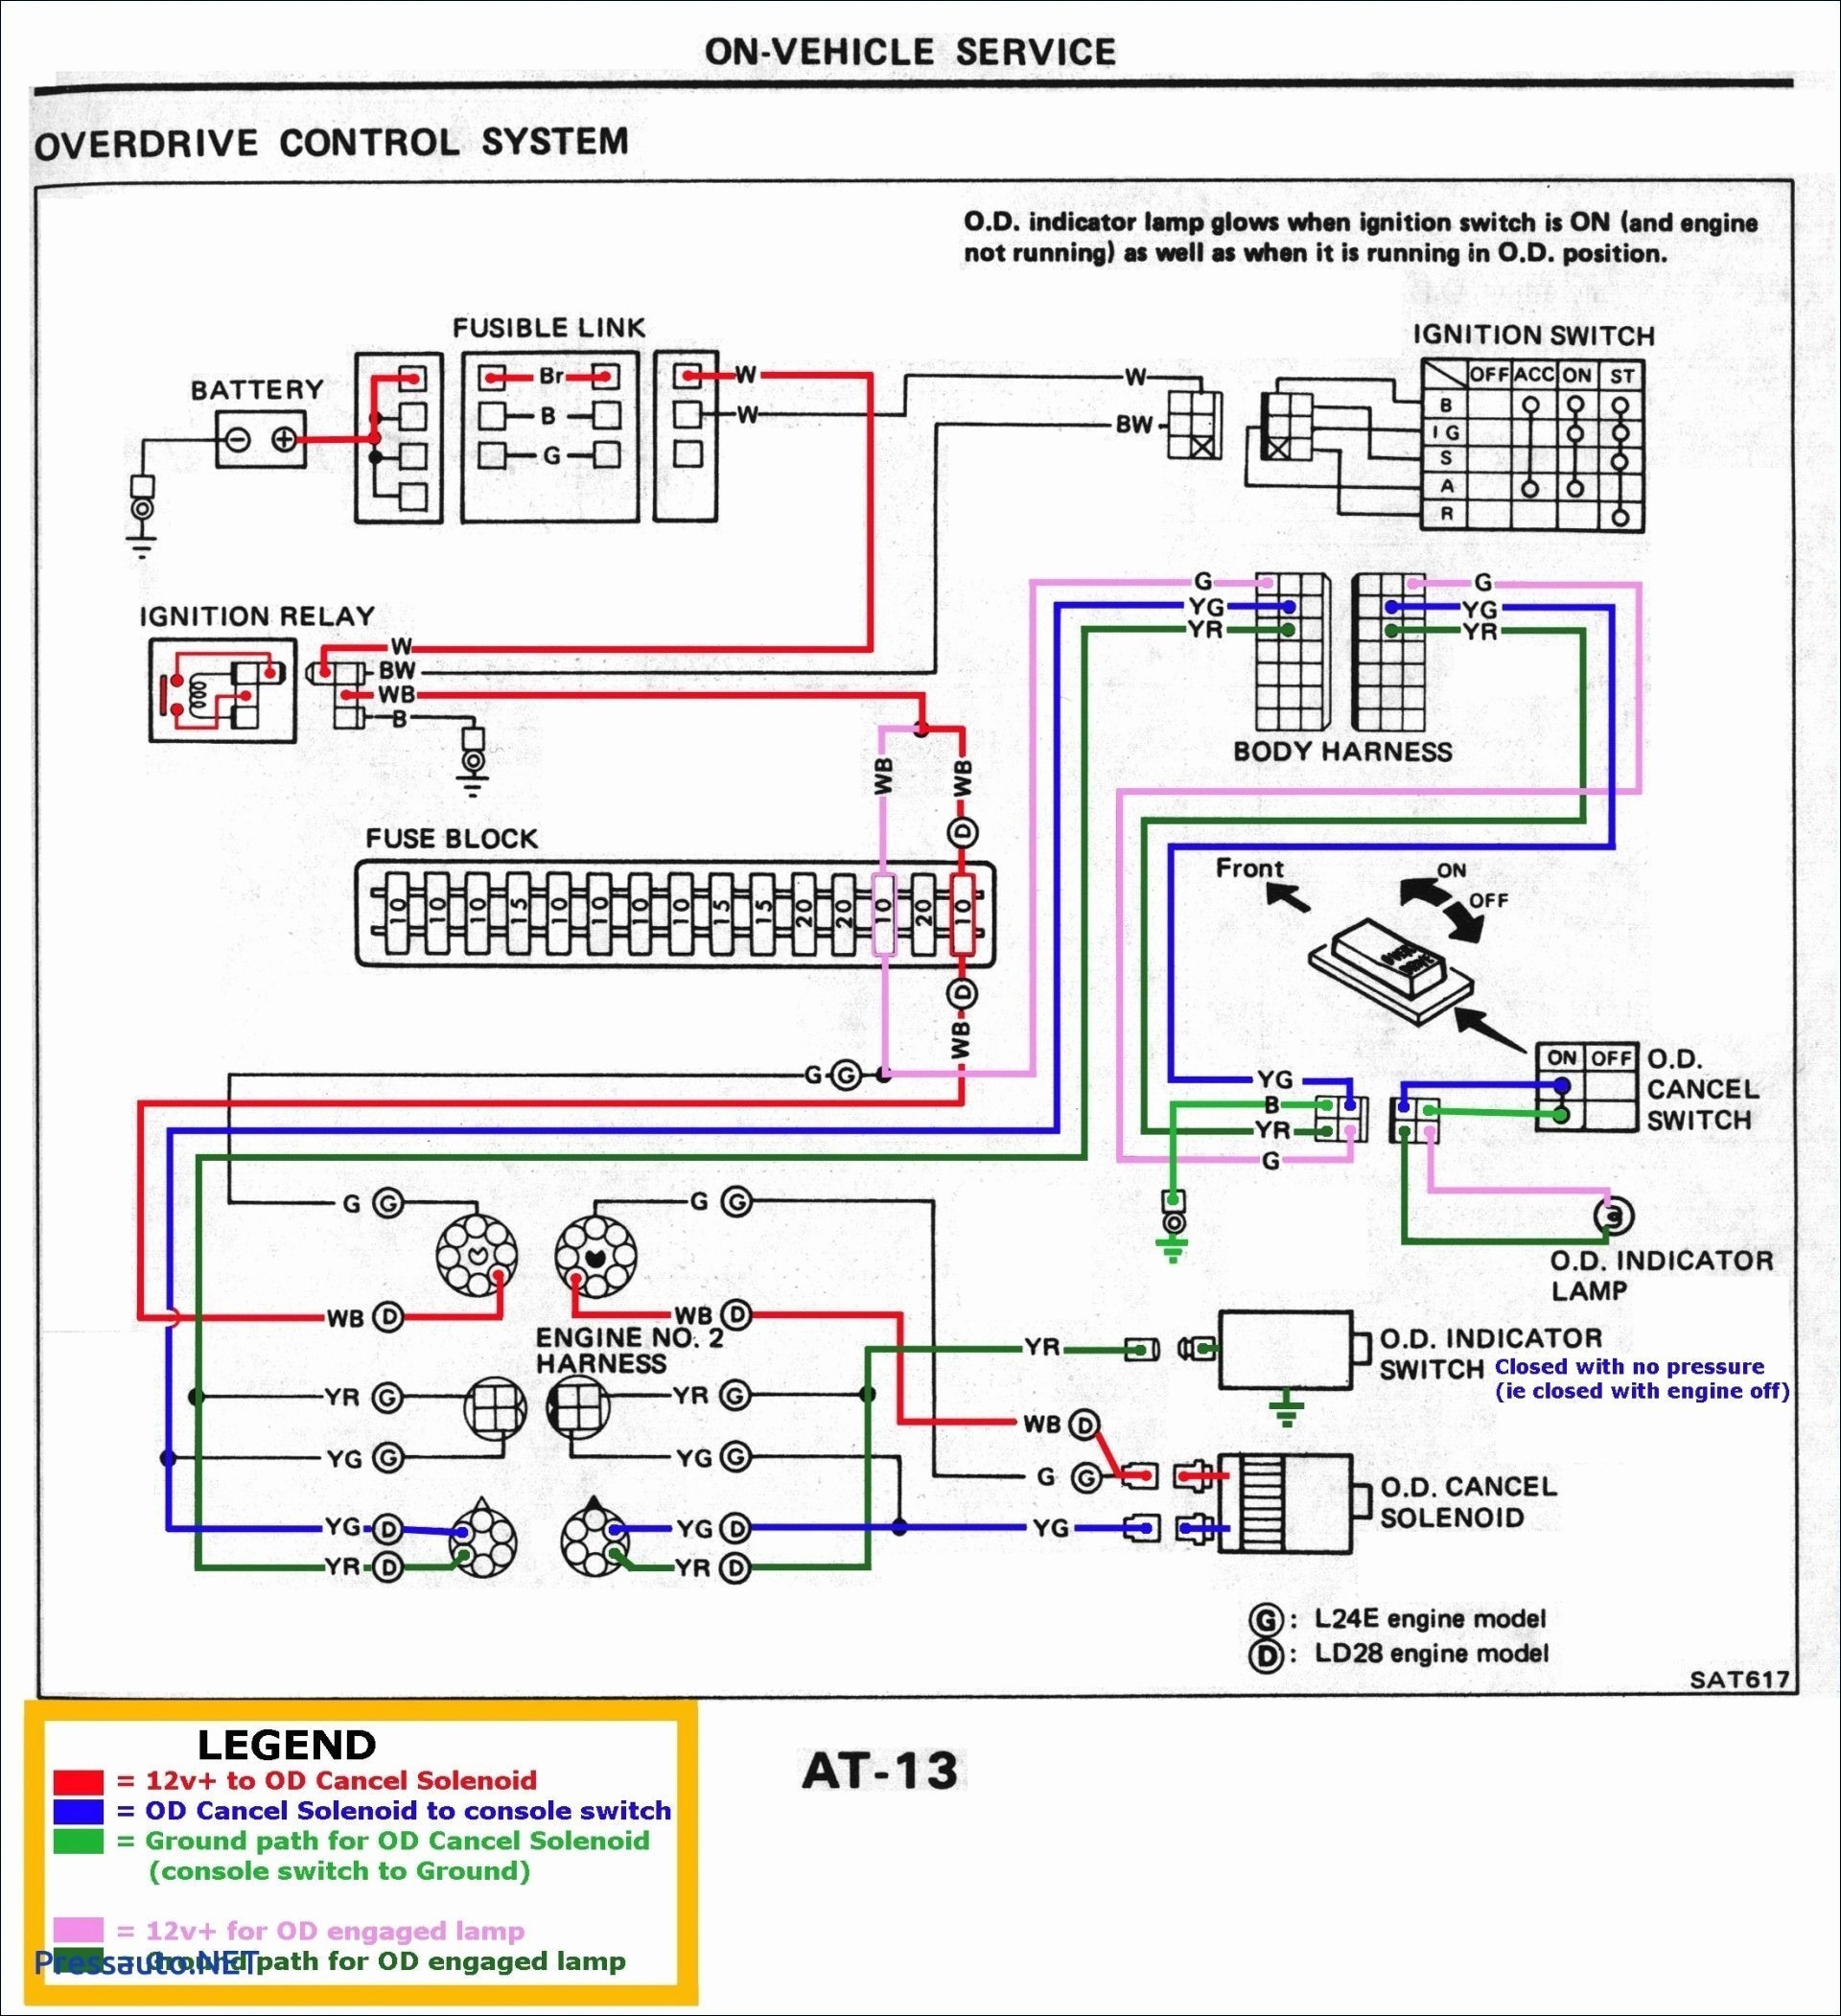 Basic Electrical Wiring Diagrams Gl1200 Ignition Switch Wiring Diagram Wiring Diagram Paper Of Basic Electrical Wiring Diagrams